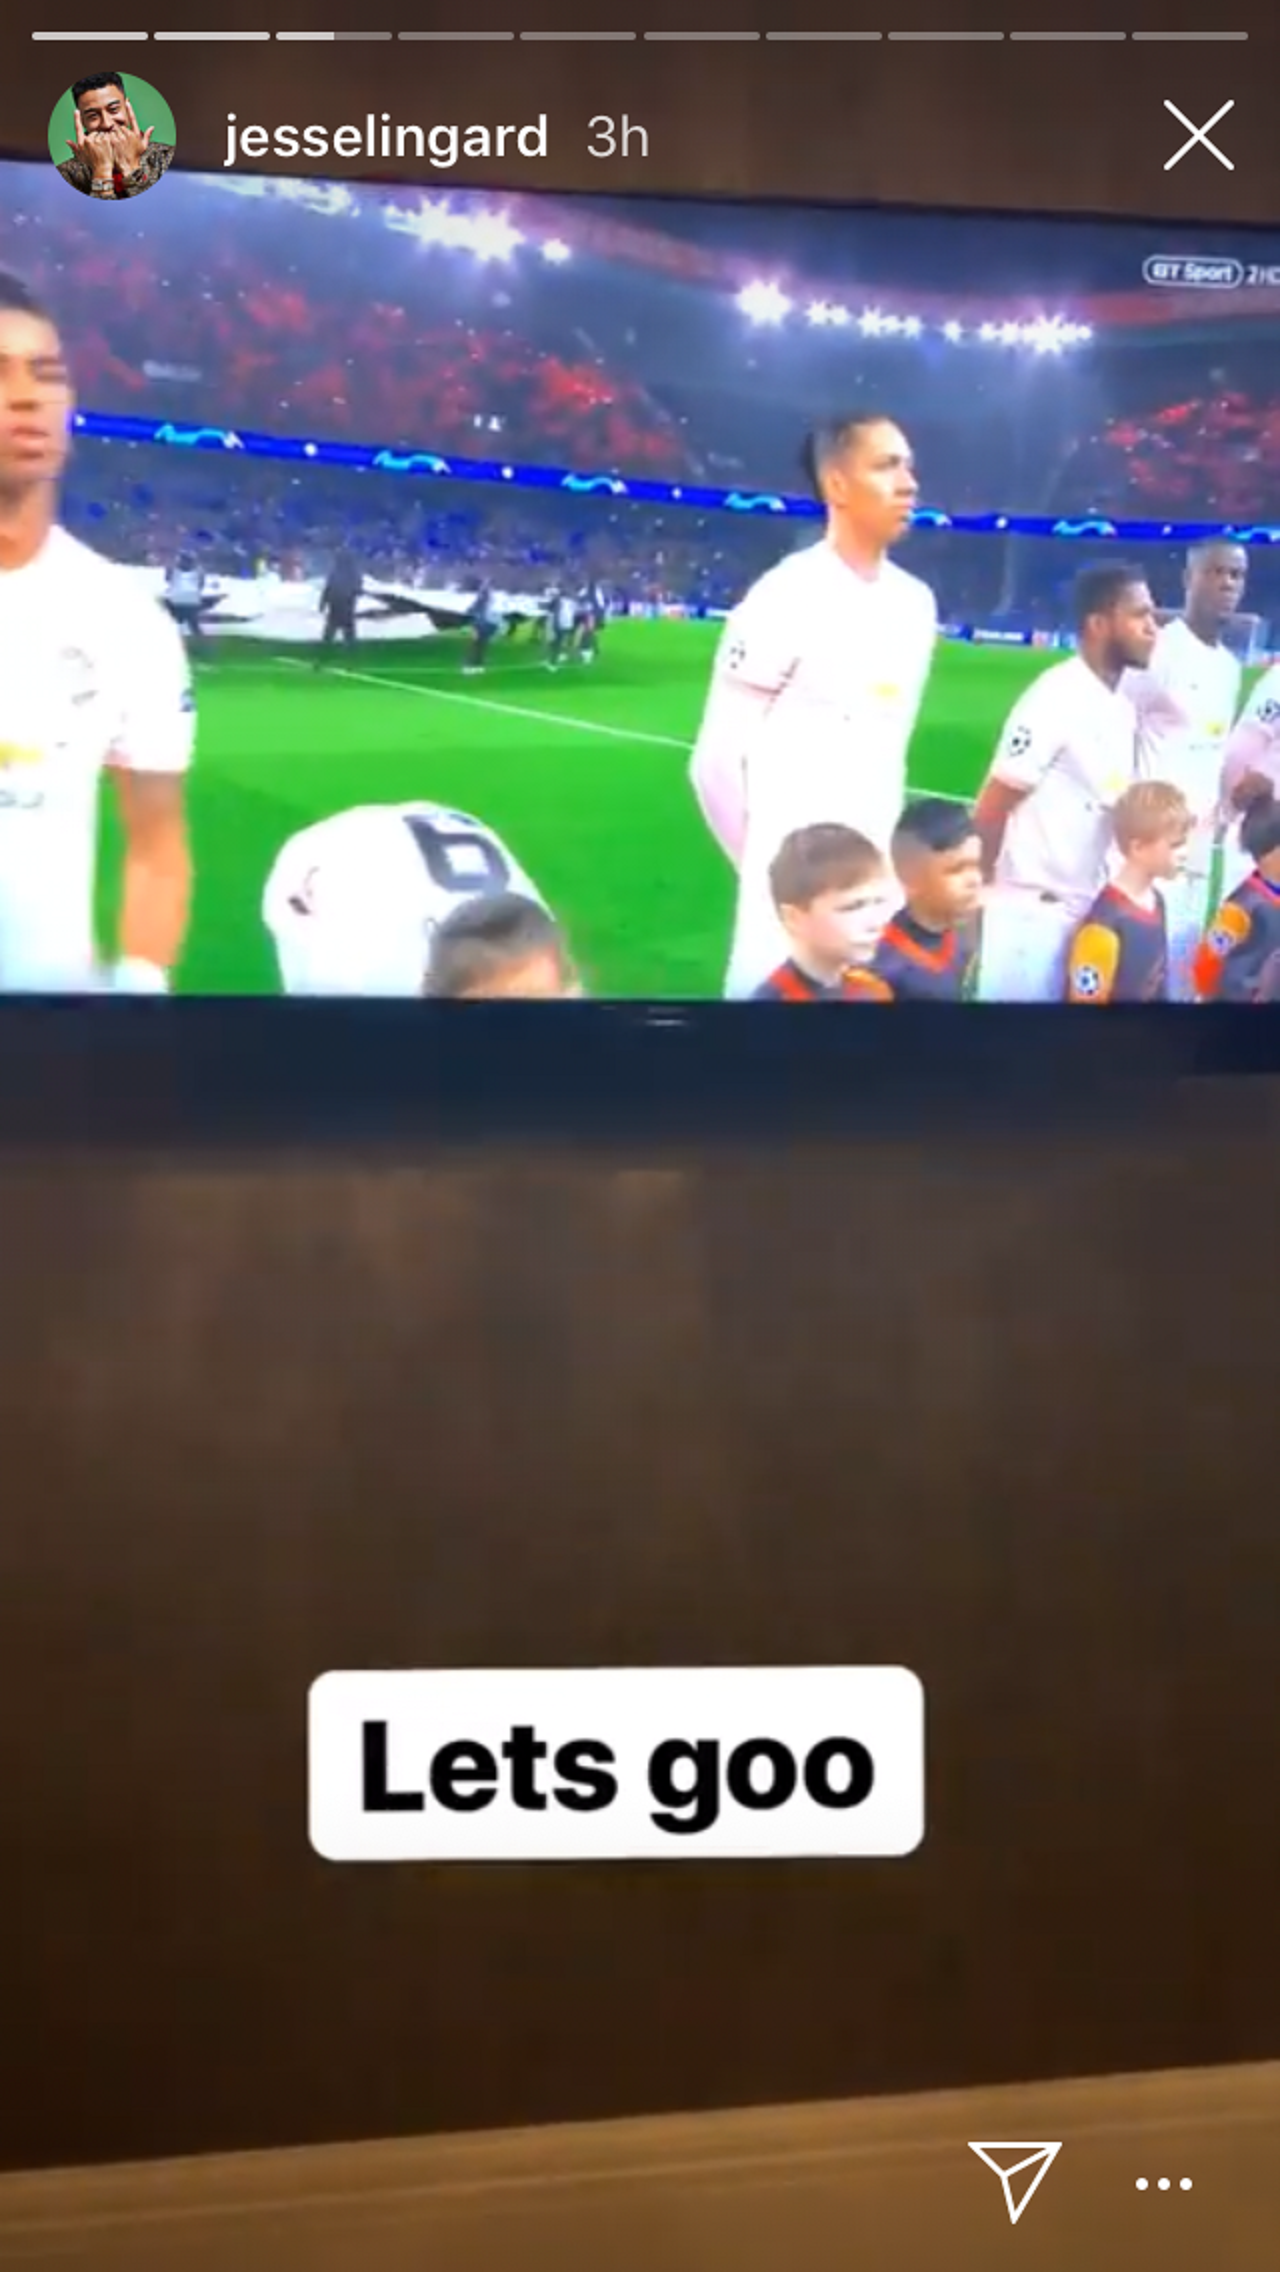 Manchester United's Jesse Lingard watches his team play in the Champions League